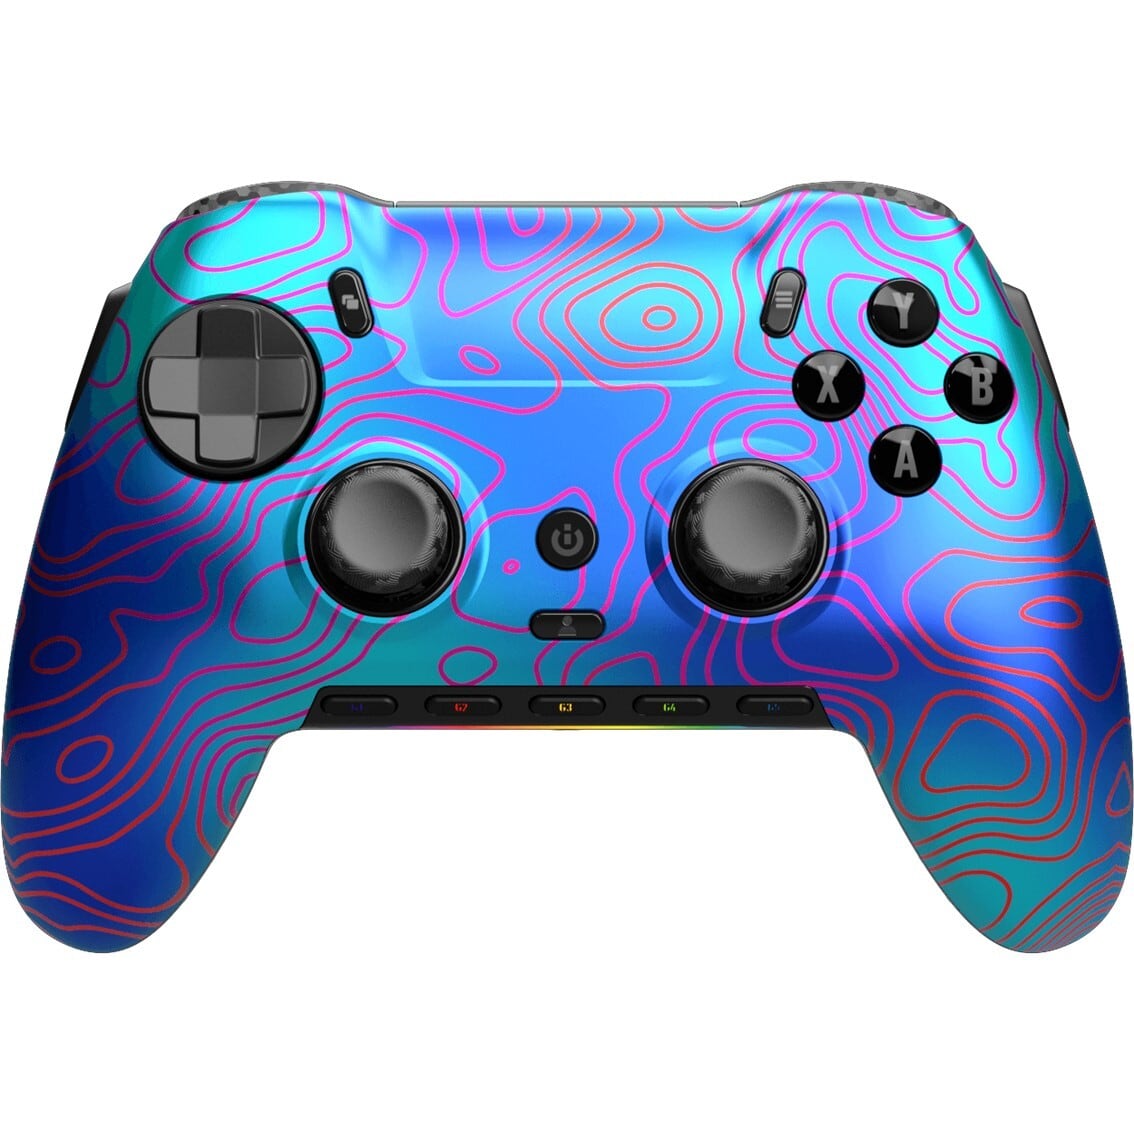 【Energon】 SCUF ENVISION PRO スカフ インビジョン プロ | SCUF販売 FREEDOM powered by BASE